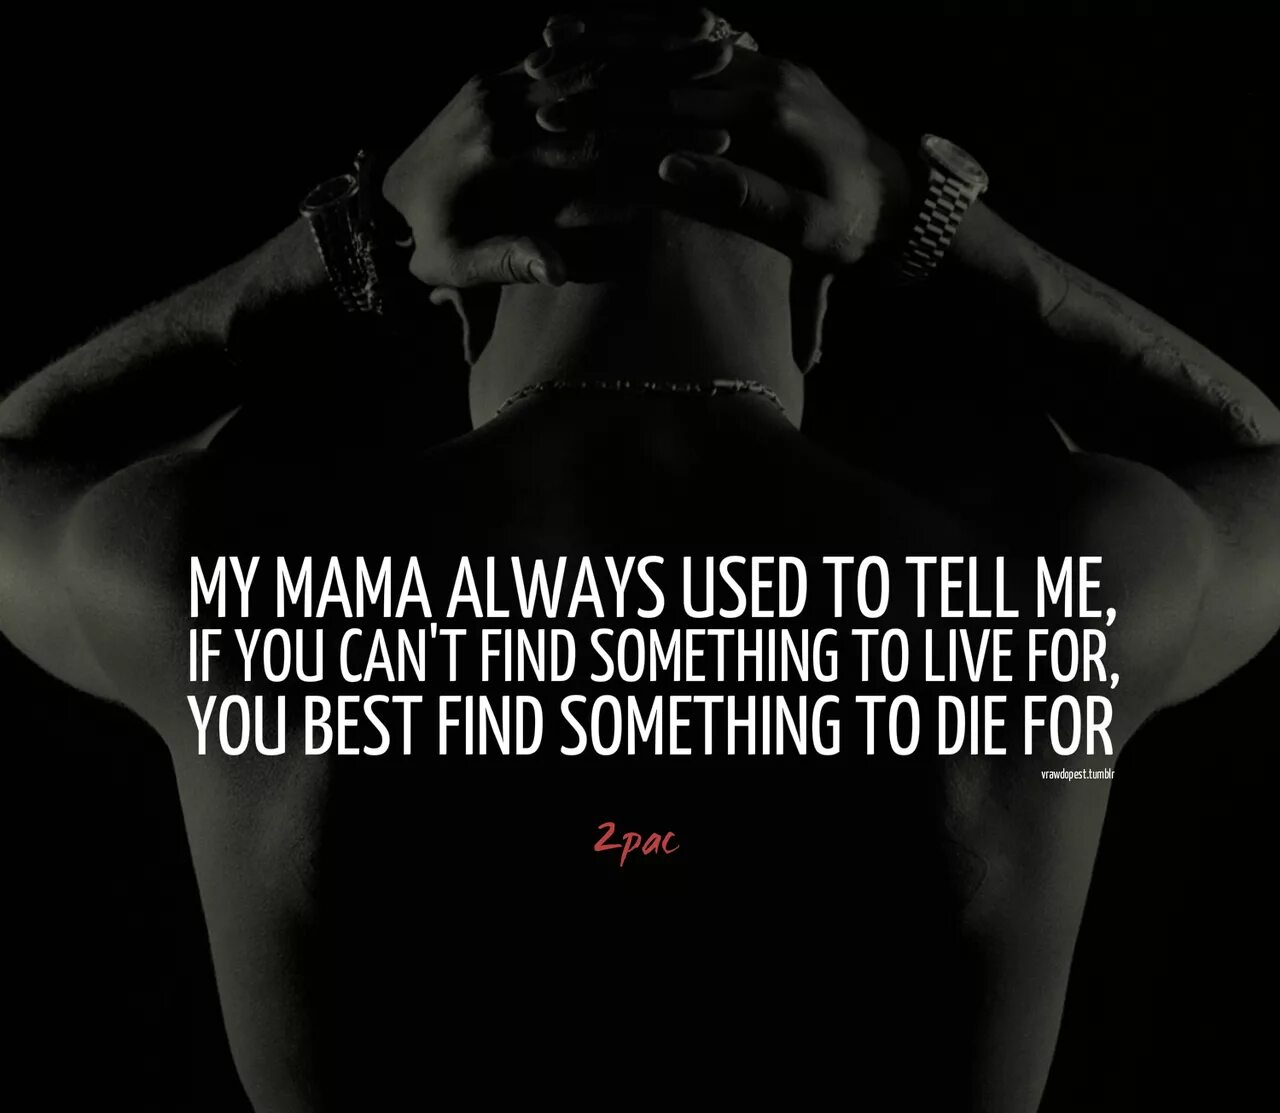 2pac цитаты. Used to always. Find something. Something to Live for.